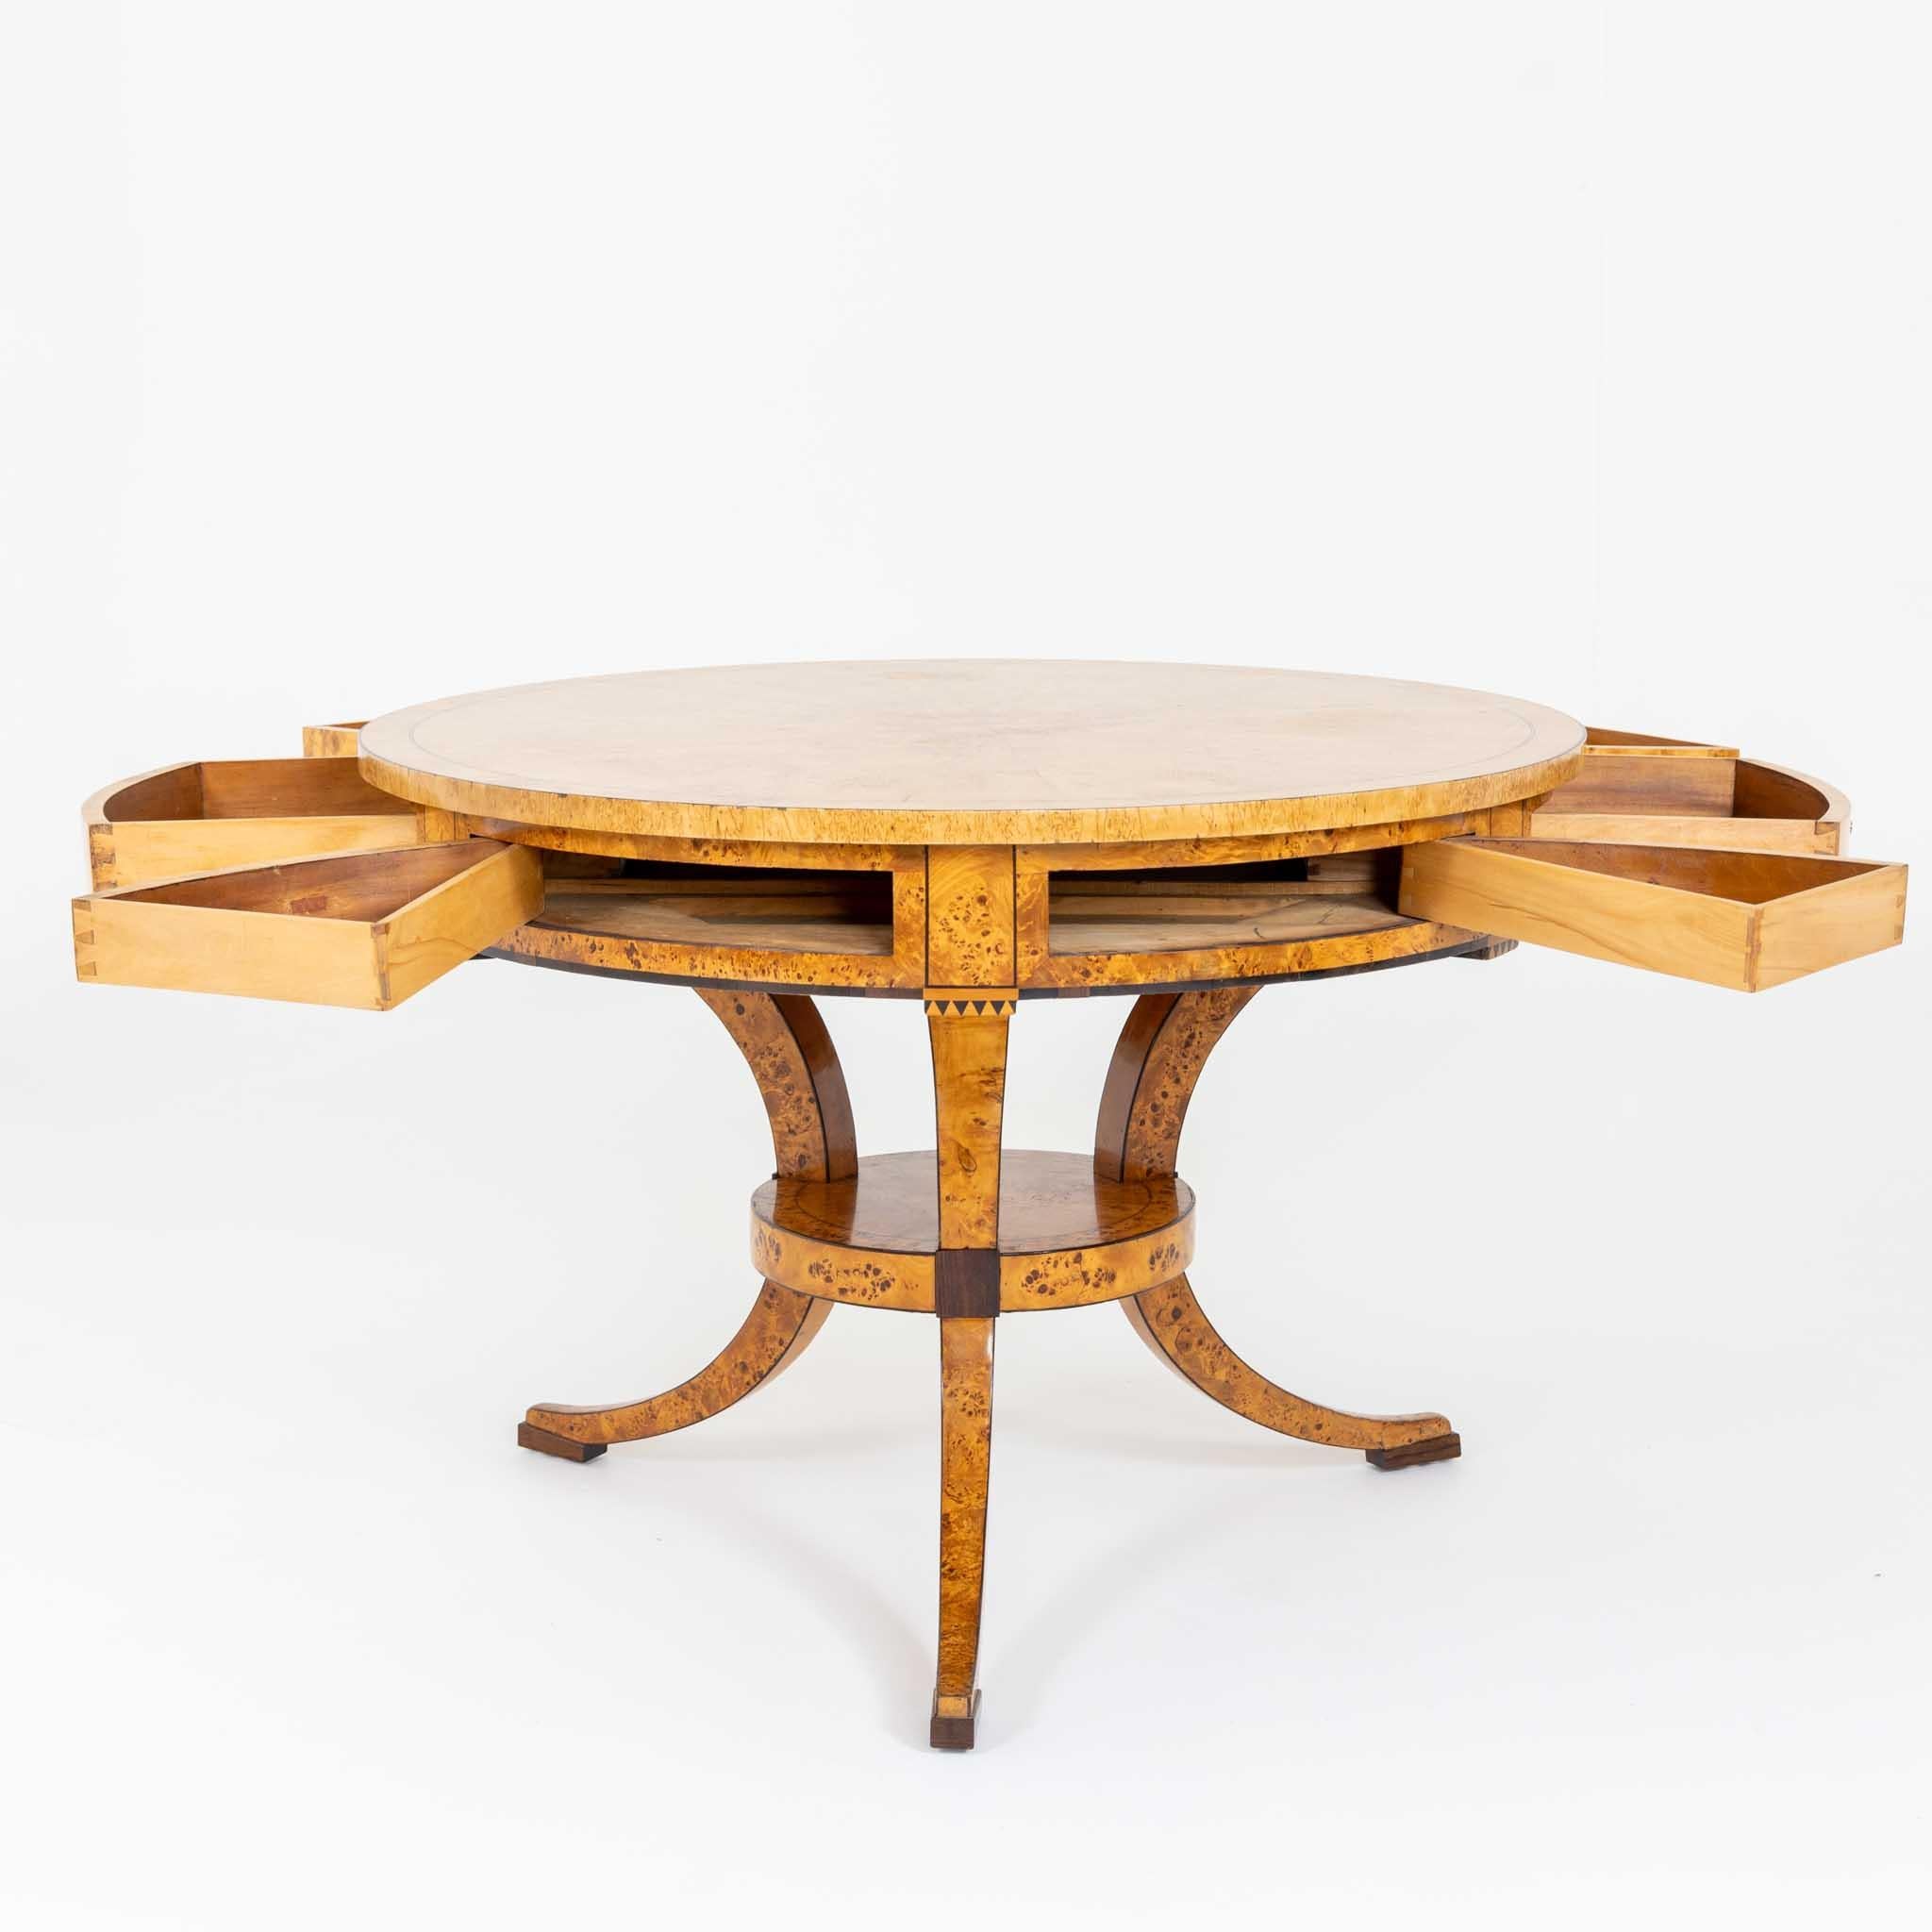 This exquisite game table features three curved legs with intermediate bracing and a deep straight apron adorned with indicated dentil strip. It boasts six drawers and a radially veneered round tabletop. The light birch veneer is highlighted at the